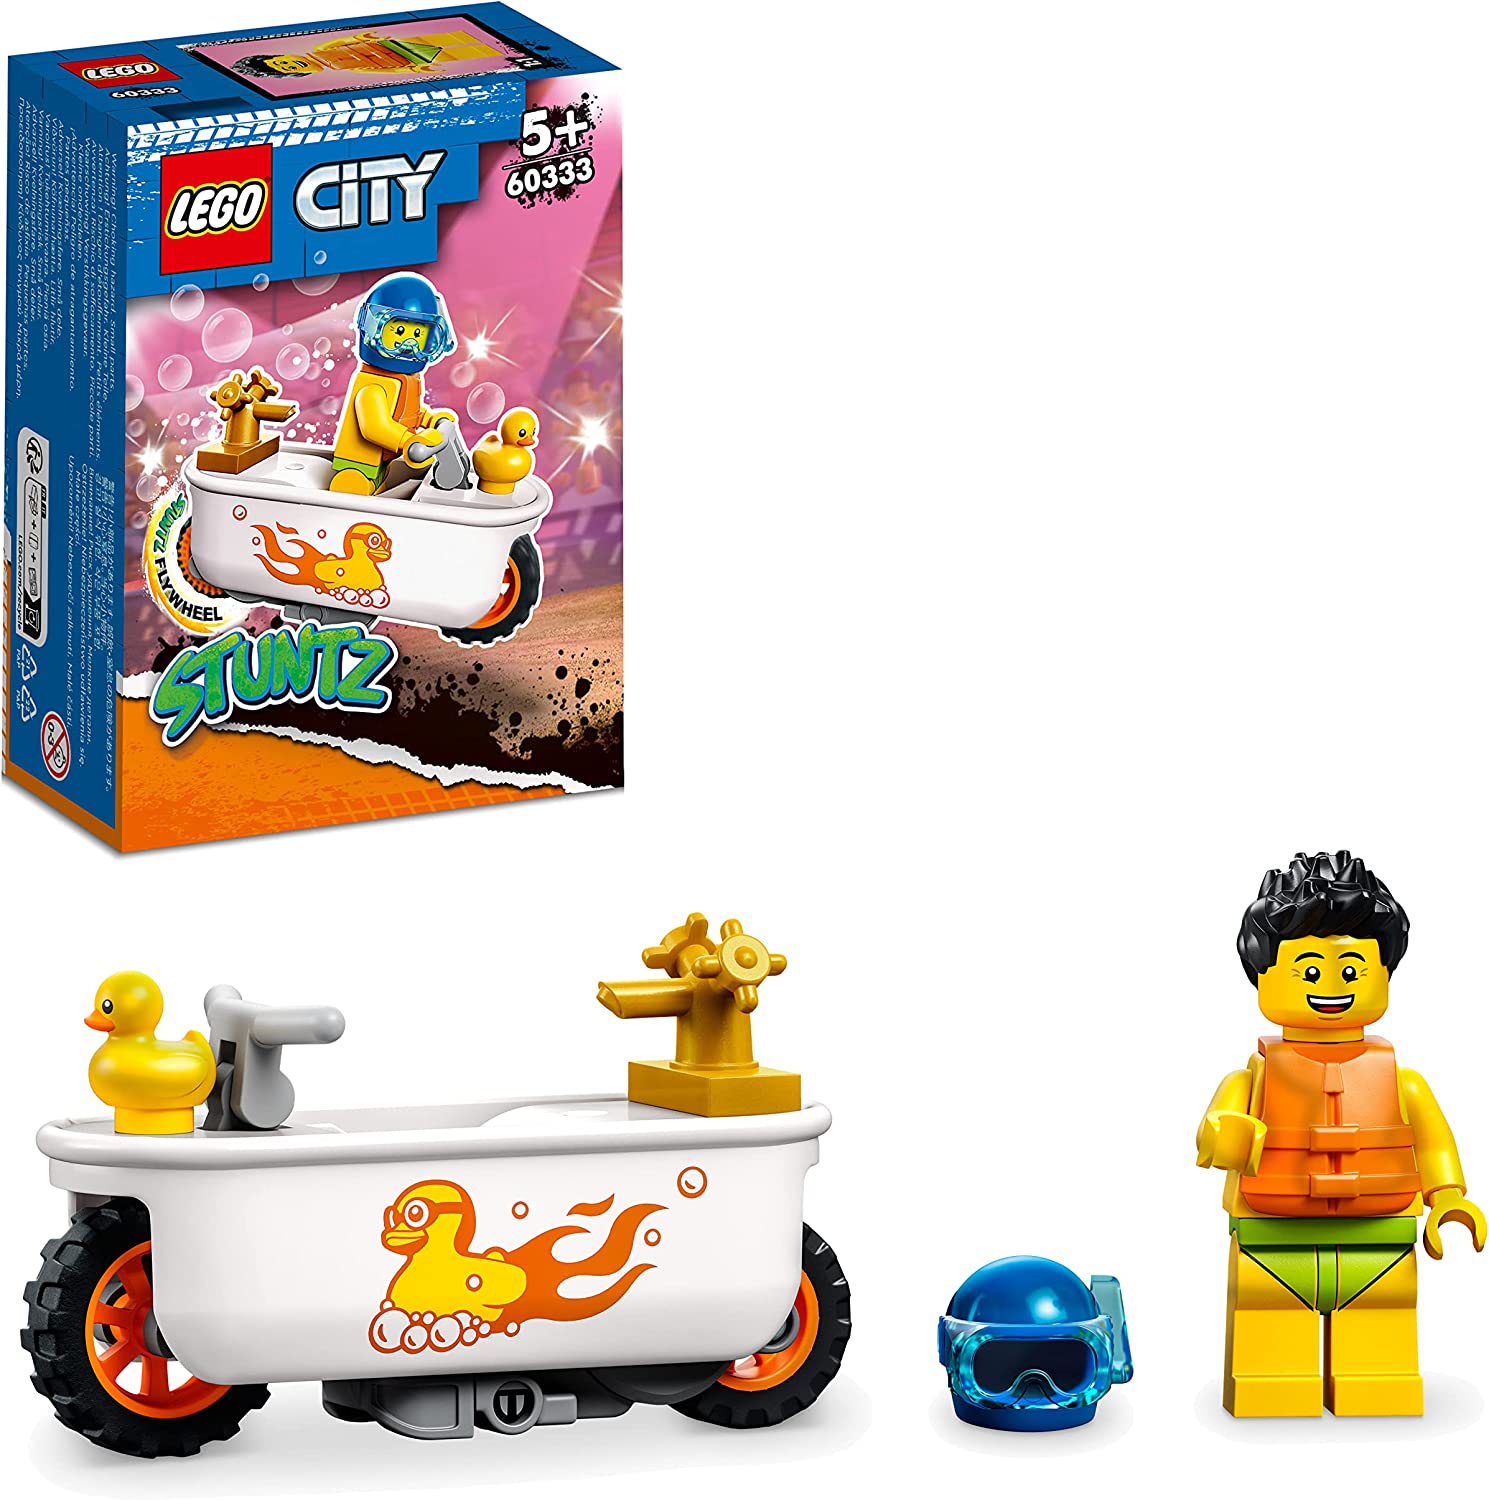 LEGO 60333 City Stuntz Bath Stunt Bike Set with Motorcycle and Mini Figure, Action Toy as a Gift for Boys and Girls from 5 Years